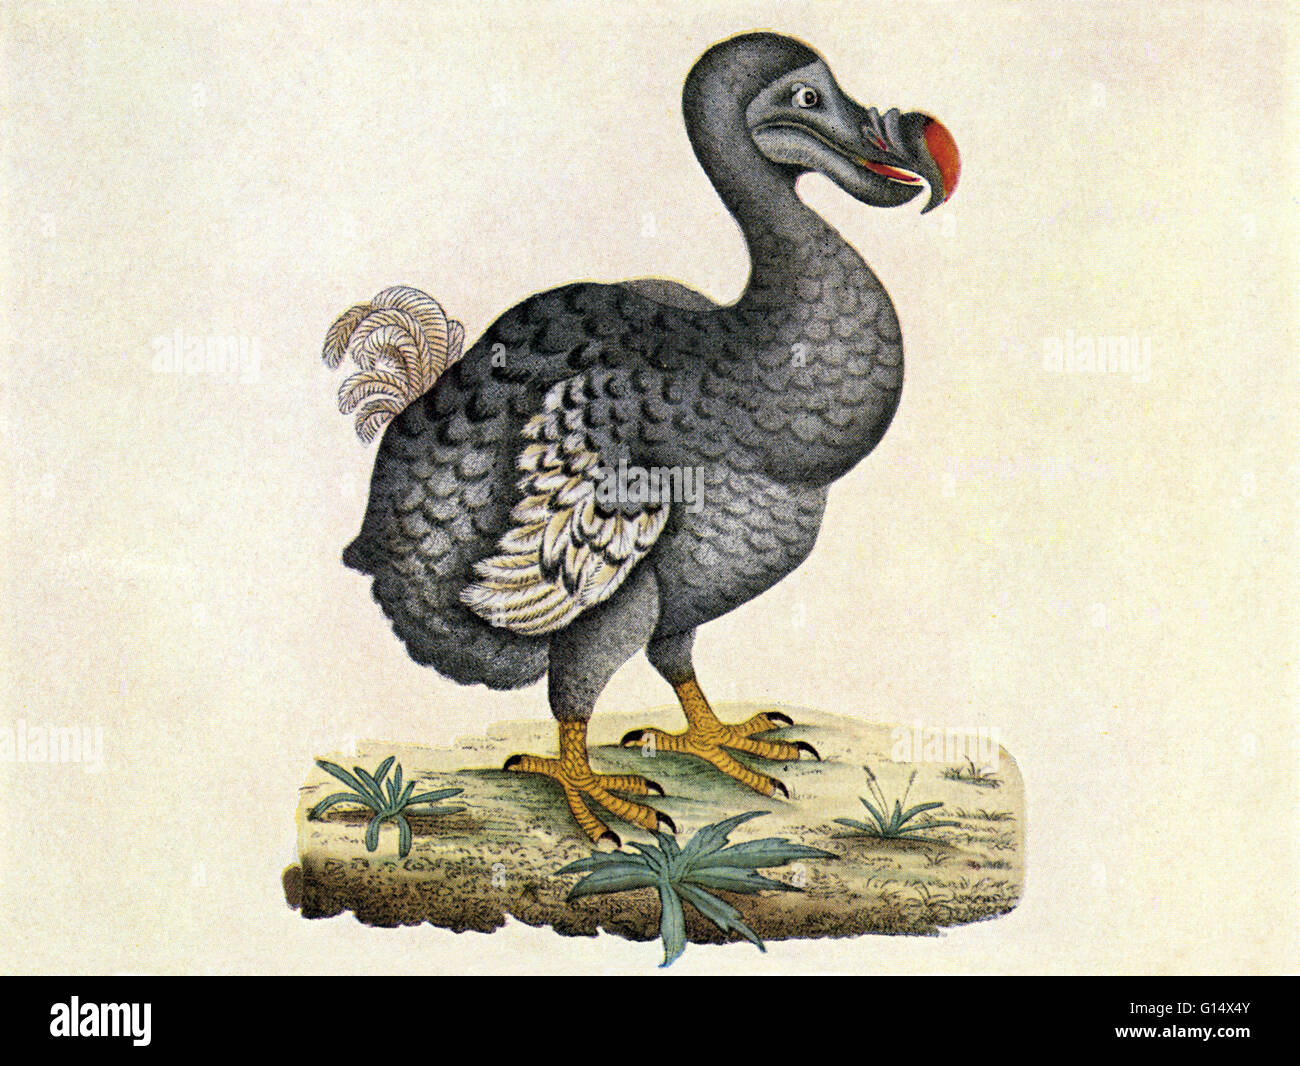 Dodo bird, Raphus cucullatus. Illustration of the extinct dodo. The dodo was a distant relative of the pigeon. Roughly the size of a swan, it was heavily-built, flightless and clumsy. Two species were known with certainty: the common dodo Raphus cucullatu Stock Photo